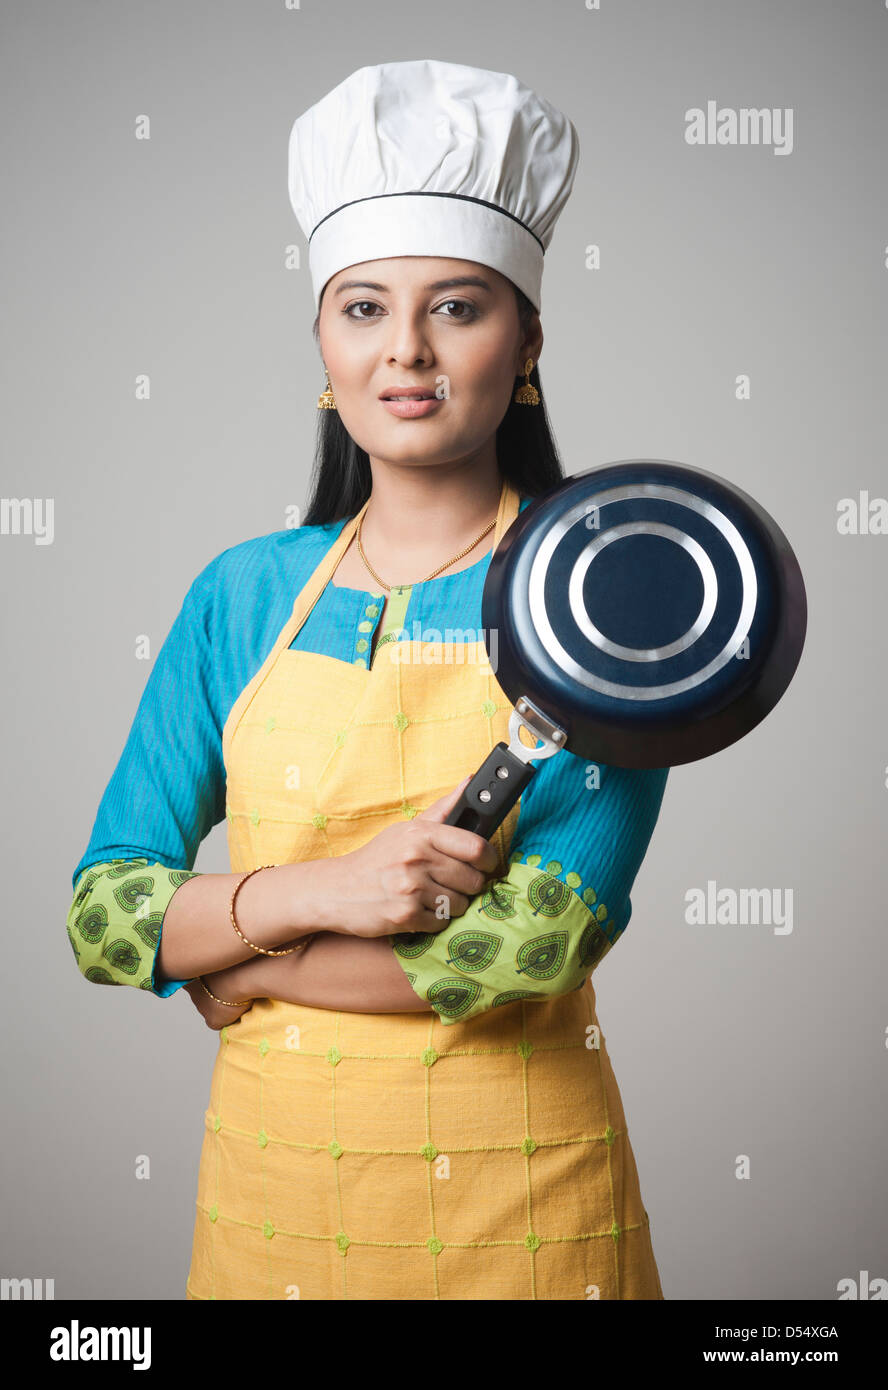 woman chef wearing a white coat ,red apron and a kitchen hood on her head  while smiling 15081017 PNG